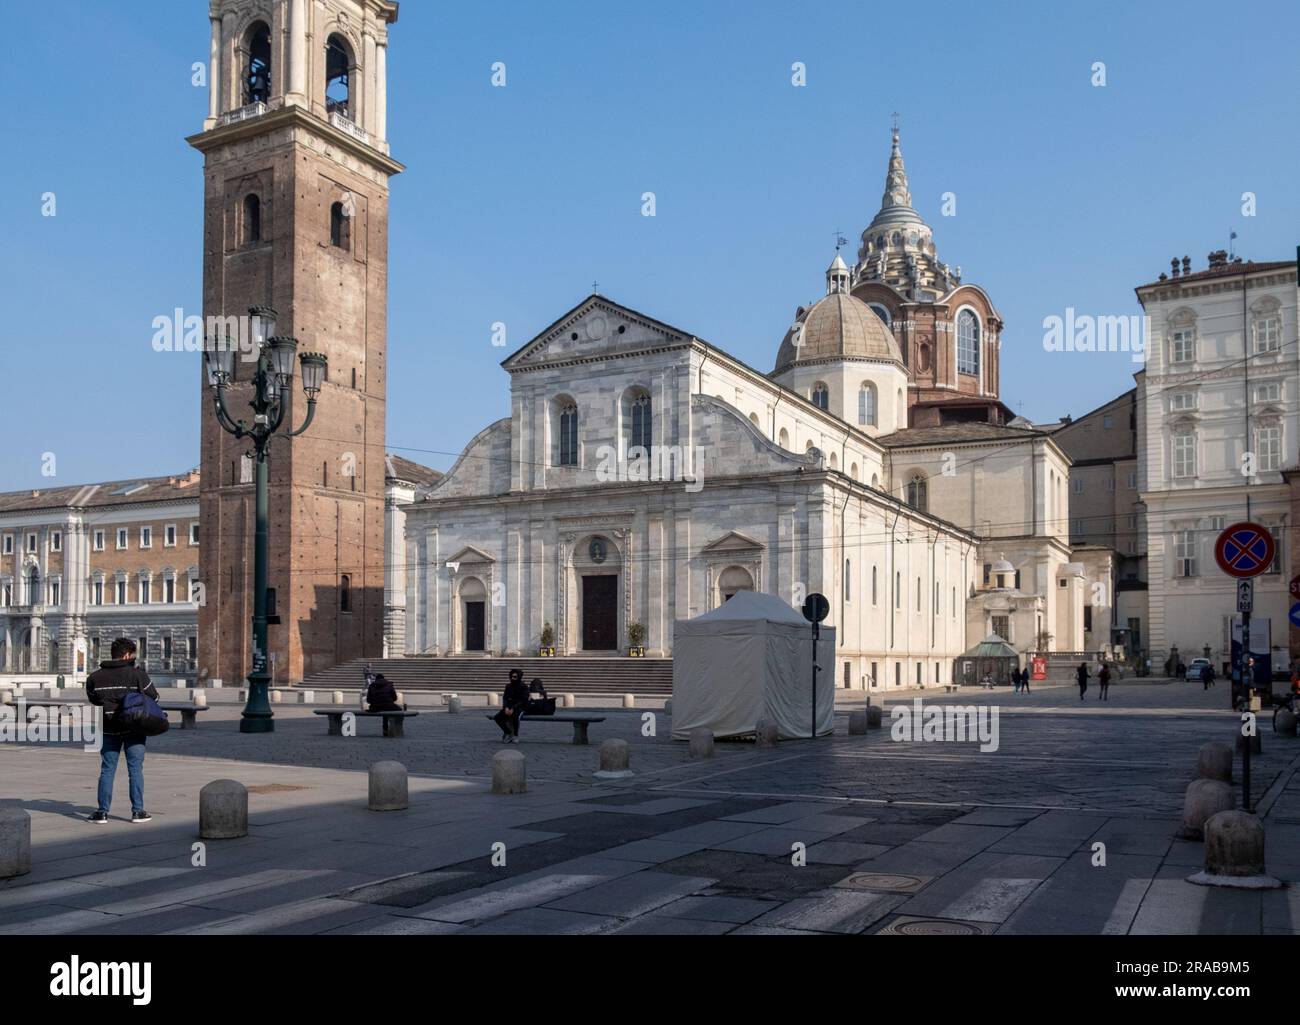 Cathedral of Saint John the Baptist (Cattedrale di San Giovanni Battista) which holds the Shround of Turin in the Quadrilatero Romano, Turin, Italy Stock Photo